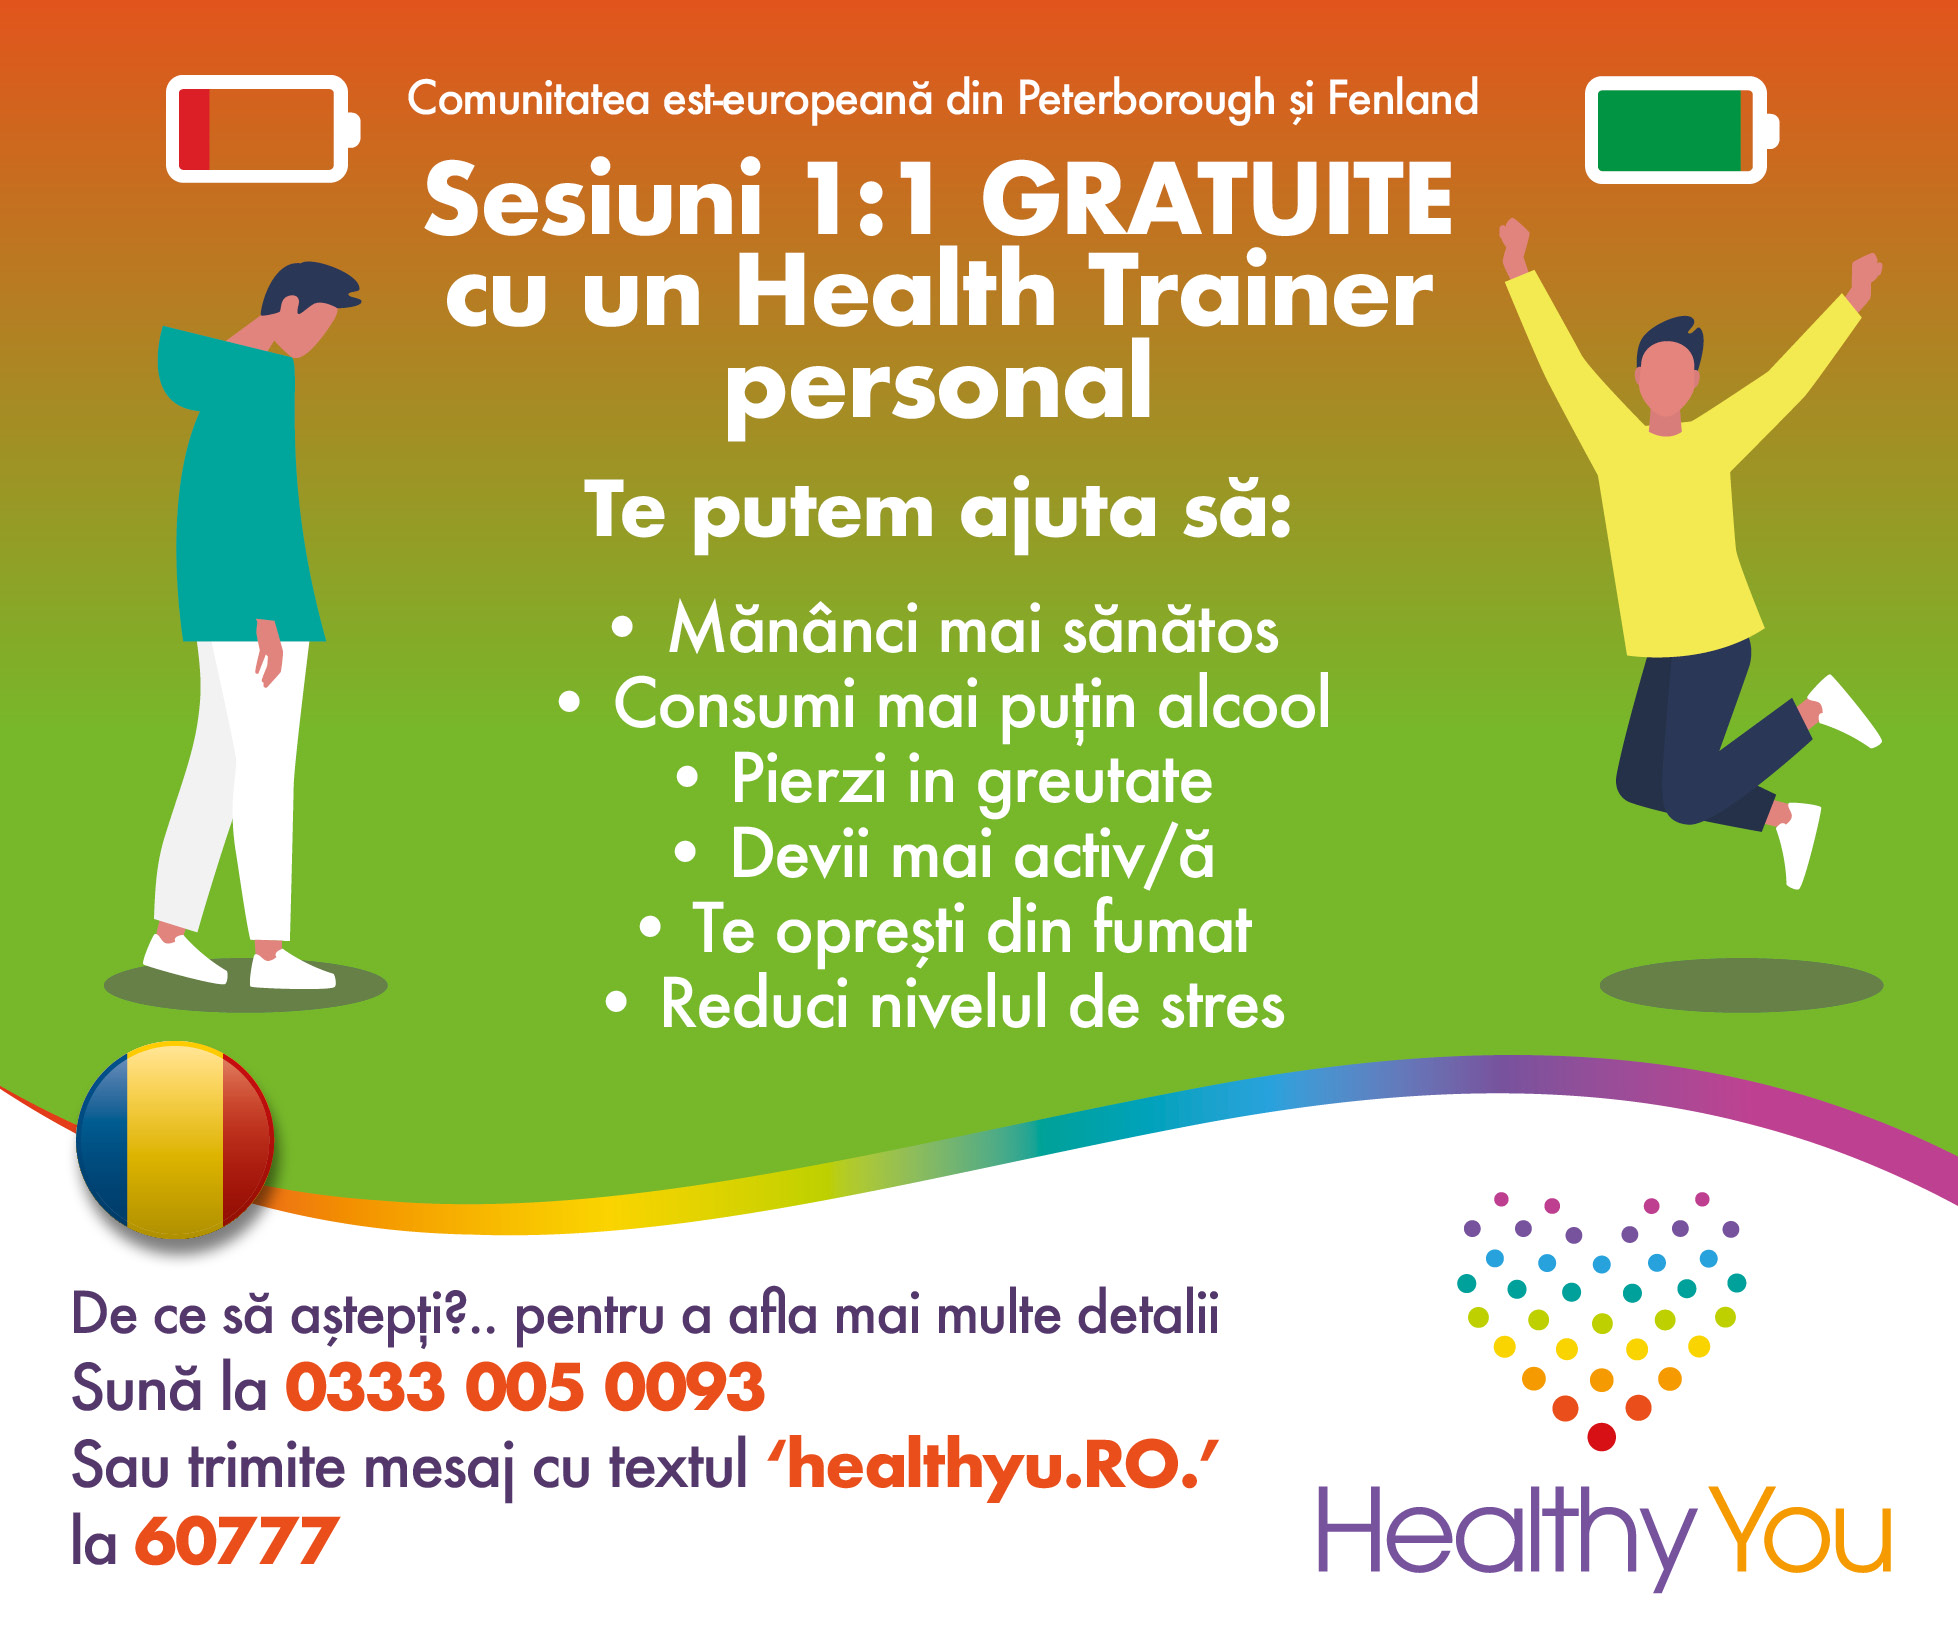 Healthy You poster